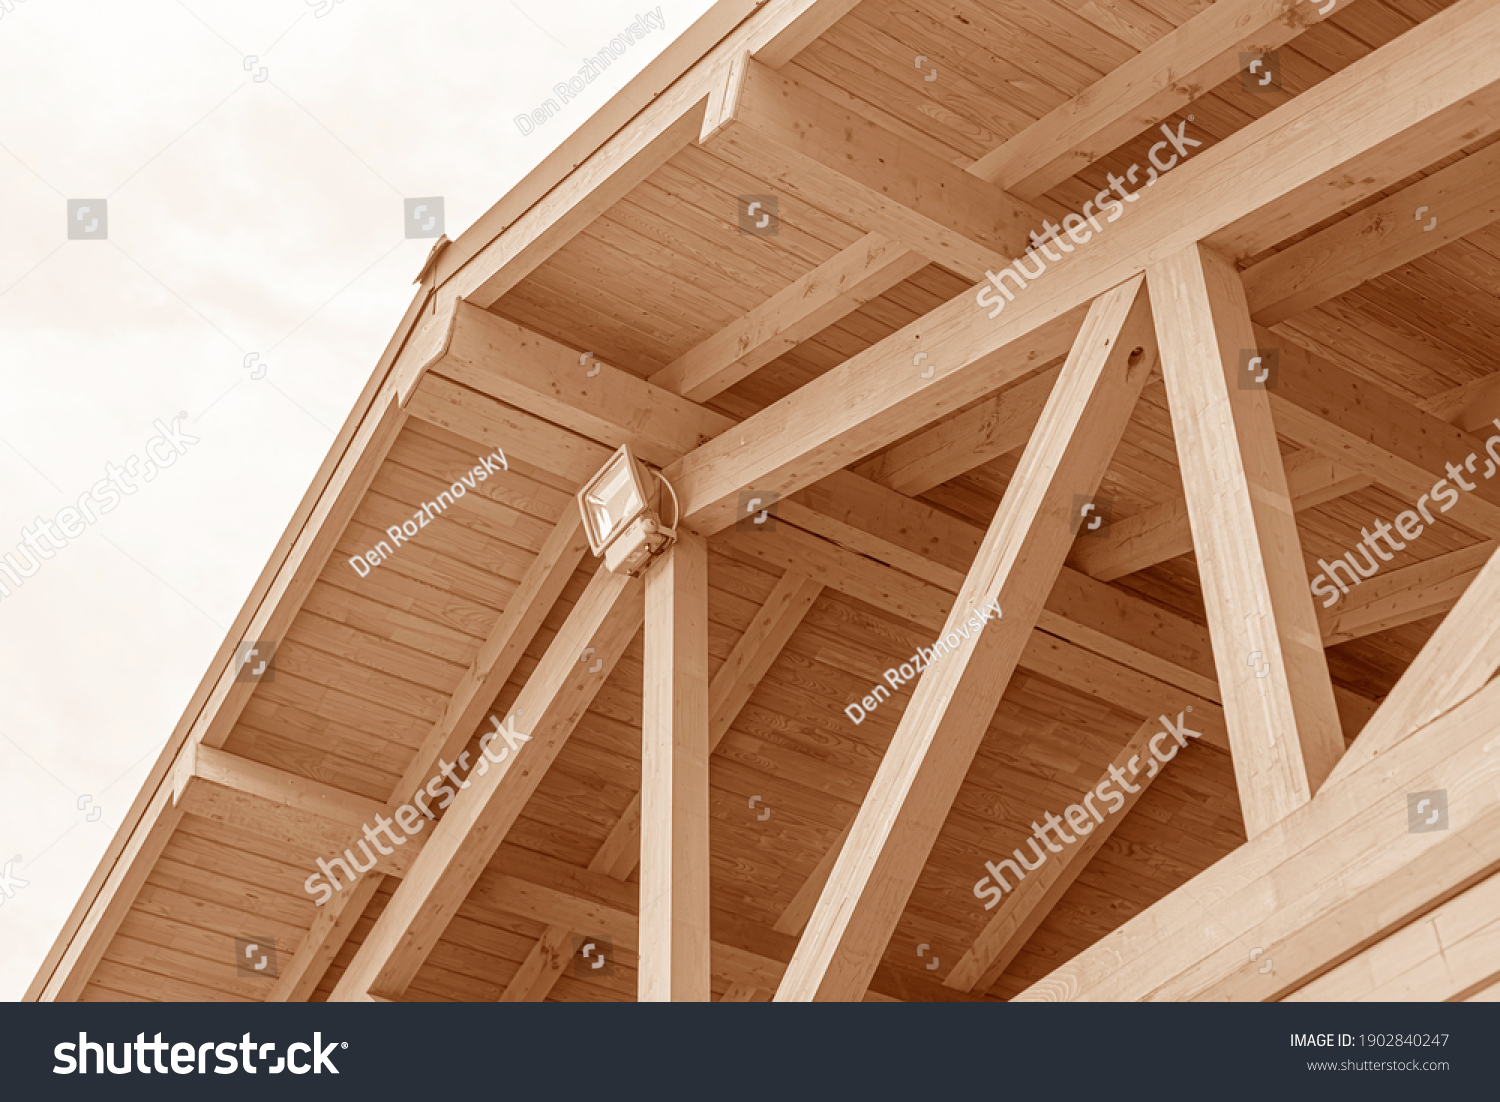 Wooden roof structure. Glued laminated timber roof. Rafters made of wood. #1902840247